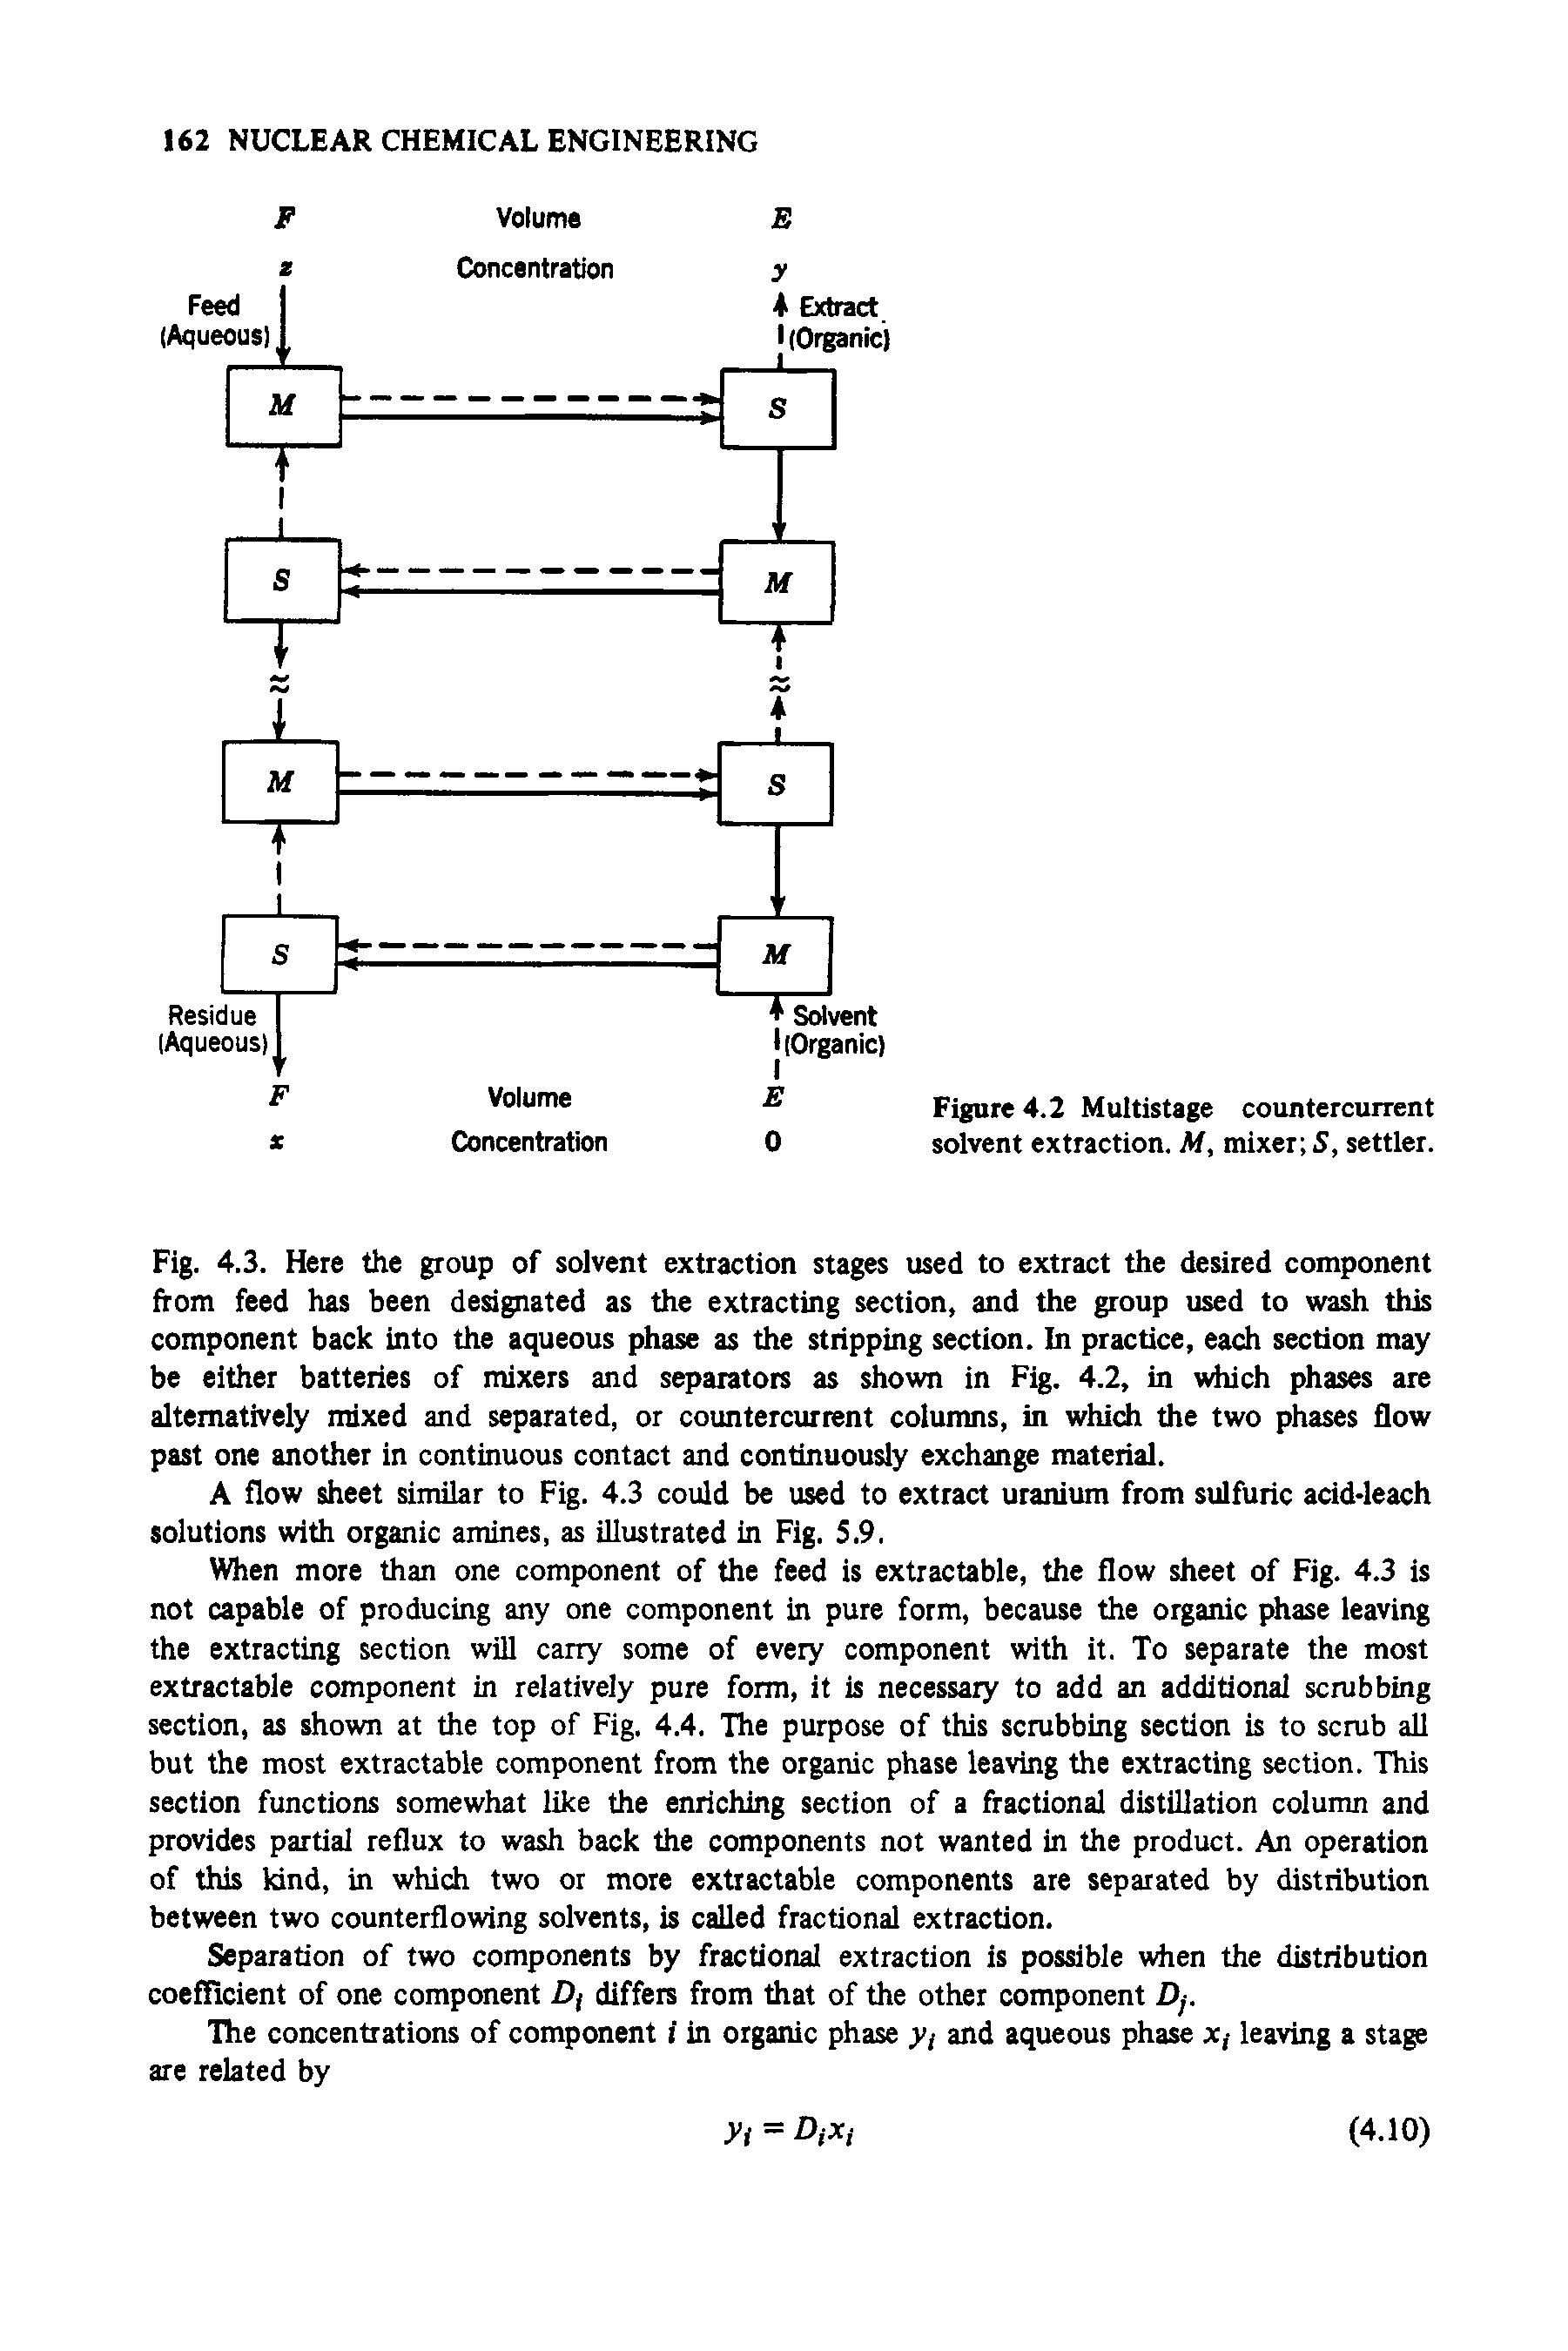 Fig. 4.3. Here the group of solvent extraction stages used to extract the desired component from feed has been designated as the extracting section, and the group tised to wash this component back into the aqueous phase as the stripping section. In practice, each section may be either batteries of mixers and separators as shown in Fig. 4.2, in wdiich phases are alternatively mixed and separated, or countercurrent columns, in which the two phases flow past one another in continuous contact and continuously exchange material.